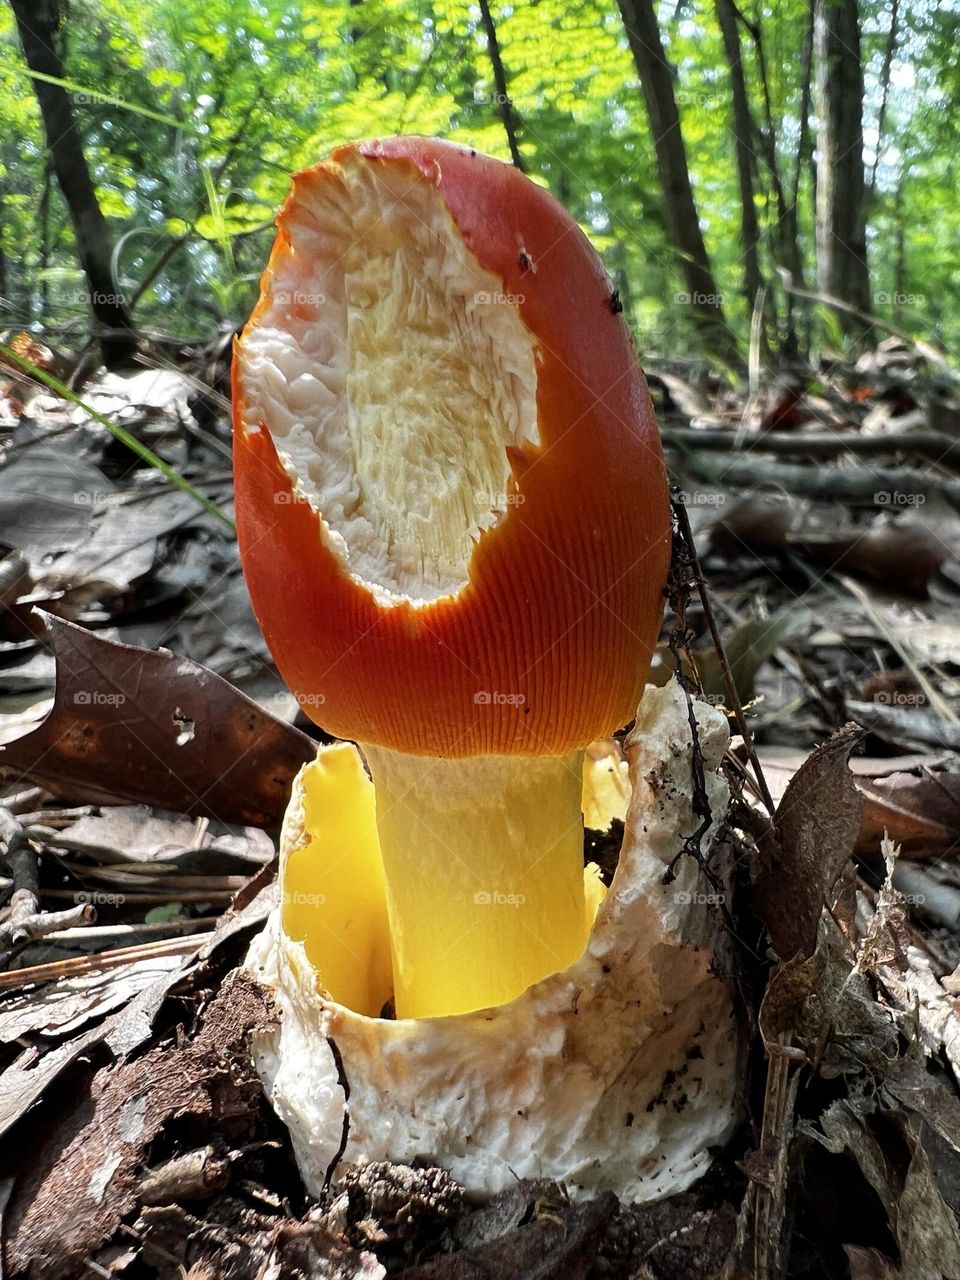 Closeup of Amanita jacksonii mushroom on the forest floor. The cup is still visible while an animal has taken a bite out of the red cap.